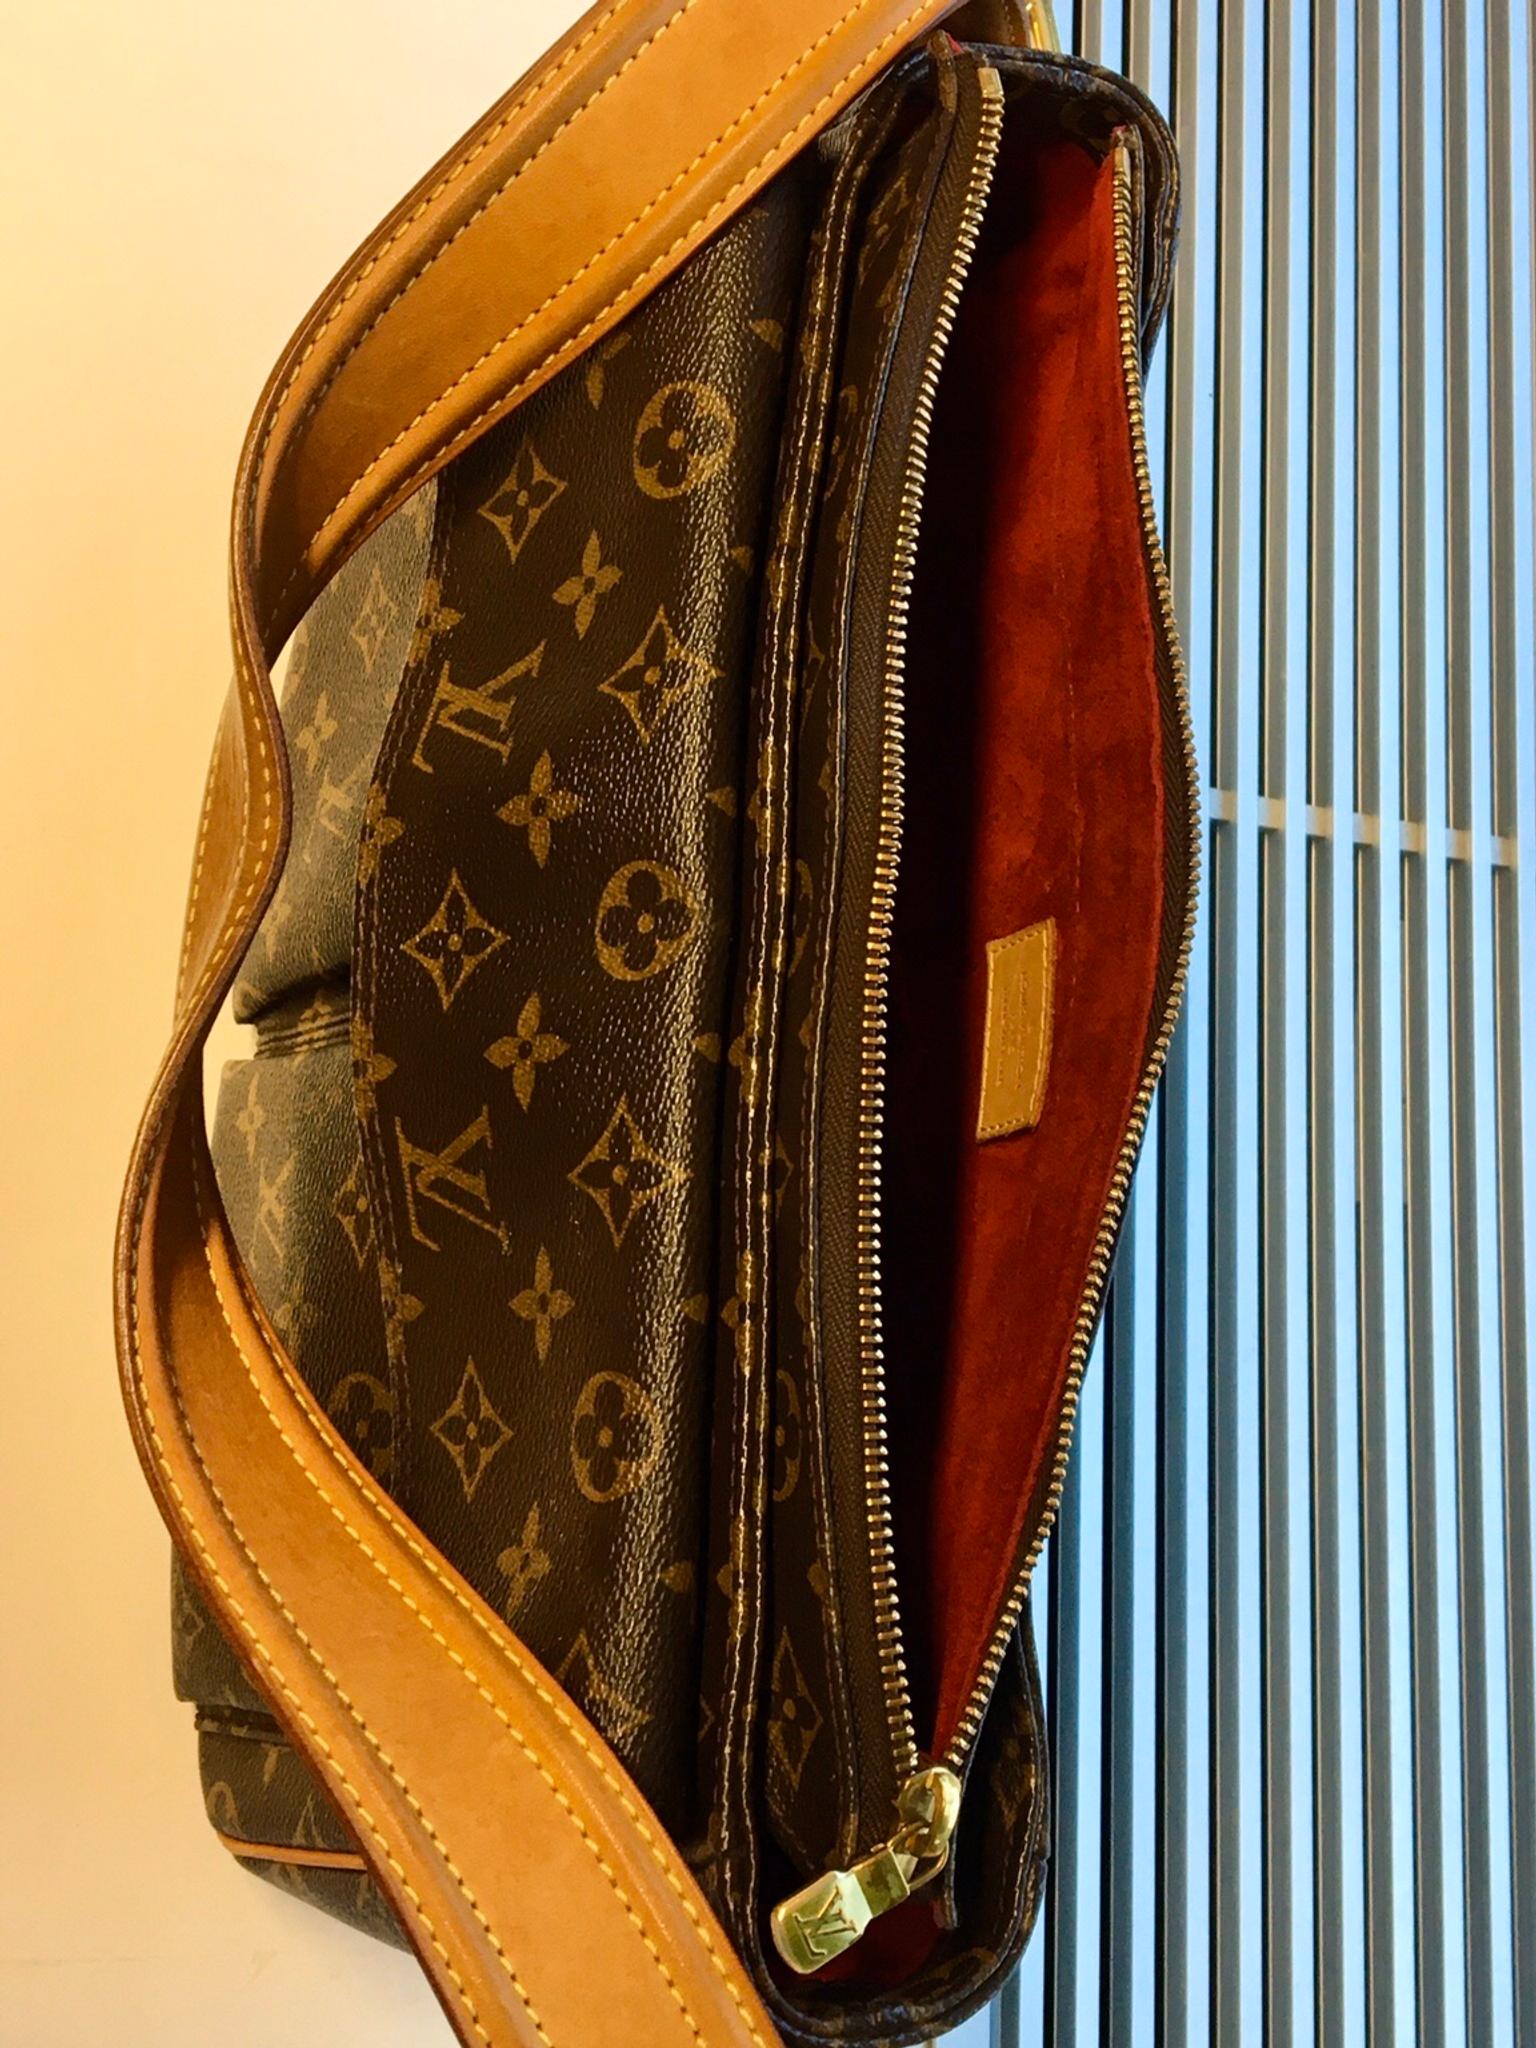 Louis Vuitton Handtasche in 1220 KG Kagran for €560.00 for sale | Shpock